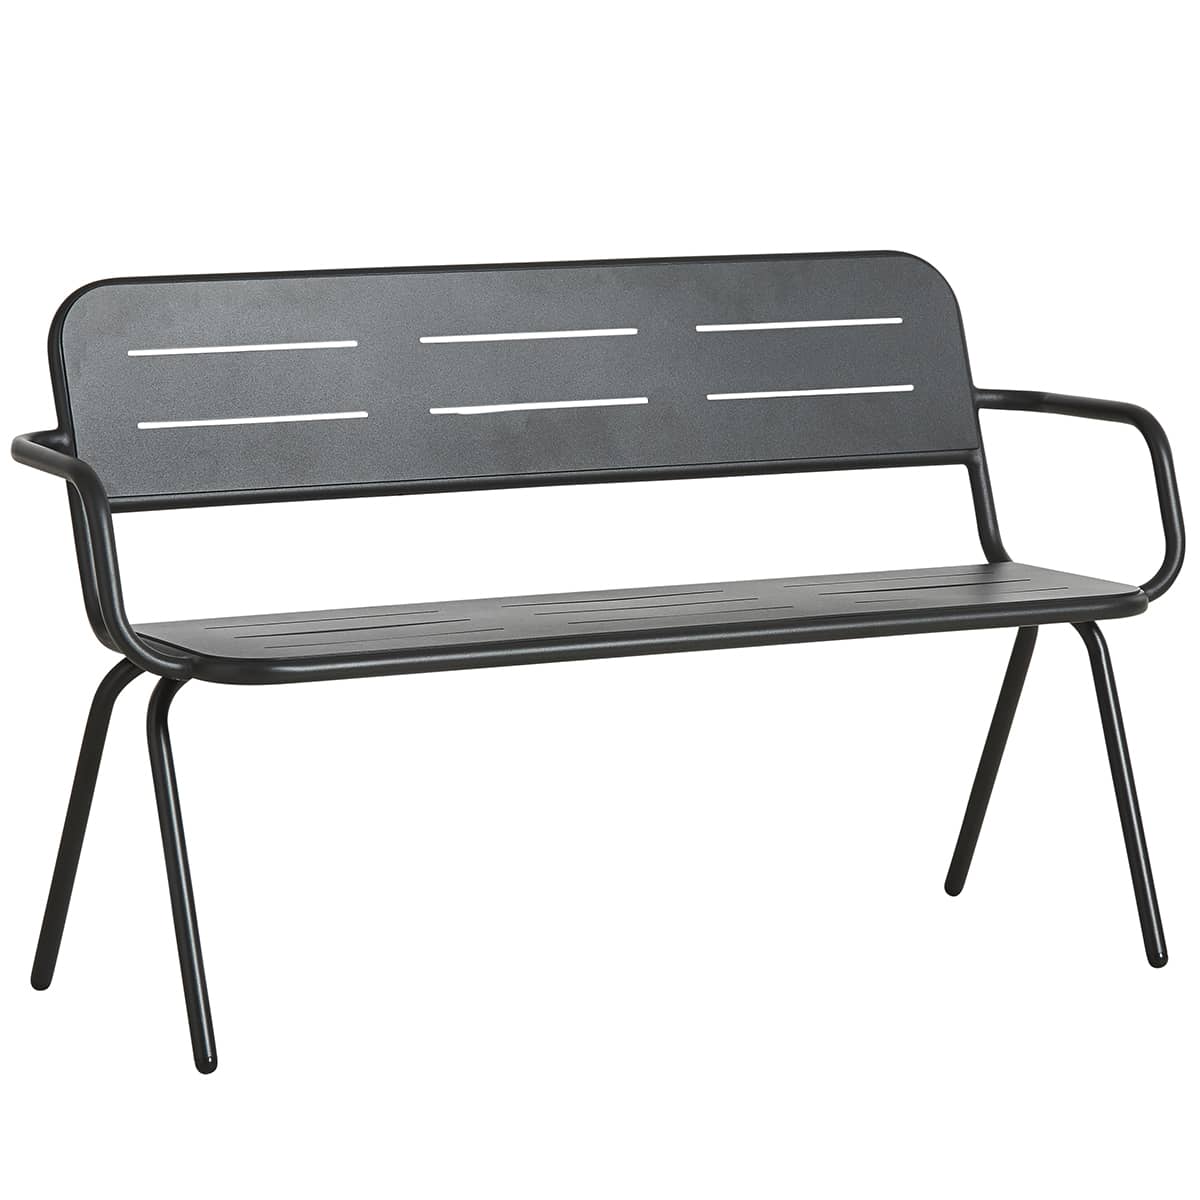 RAY outdoor bench with armrests, designed by WOUD